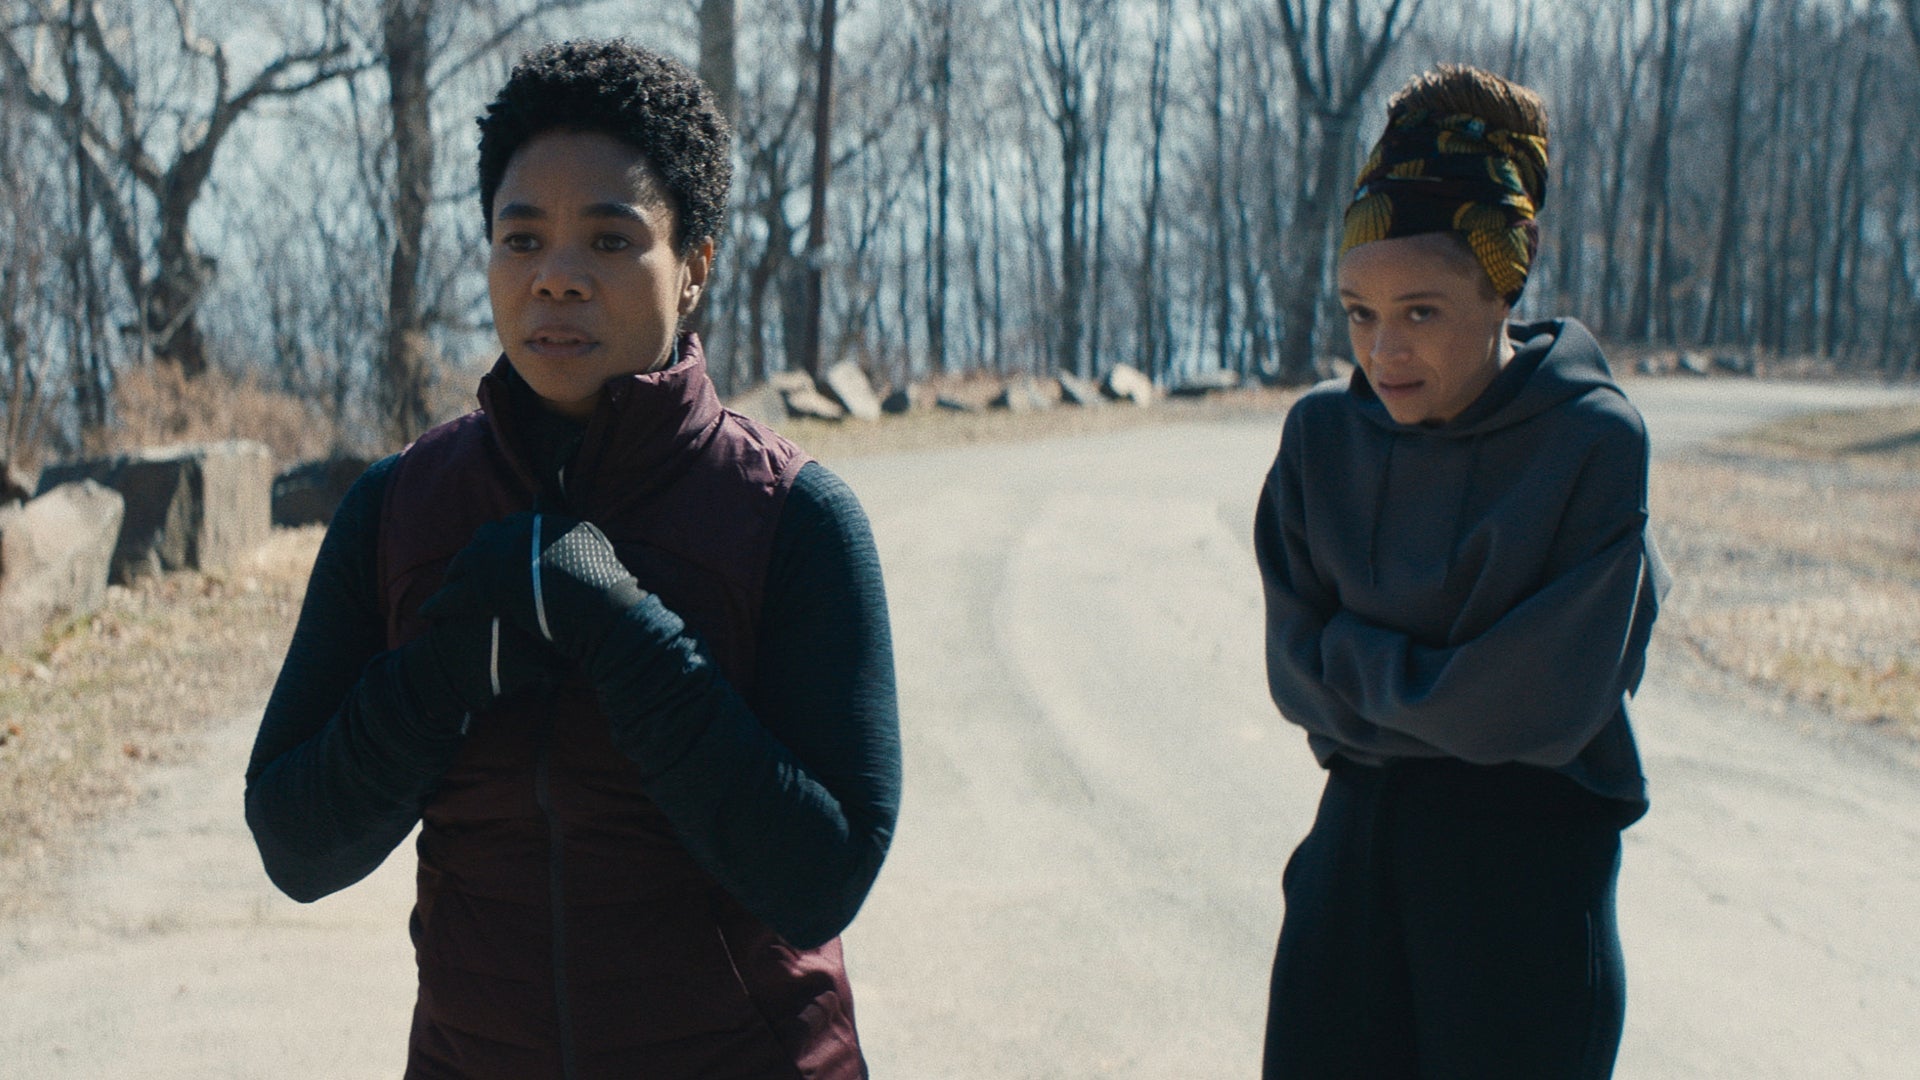 regina hall and zoe renee stand on desolate dirt path in master film black content 2022